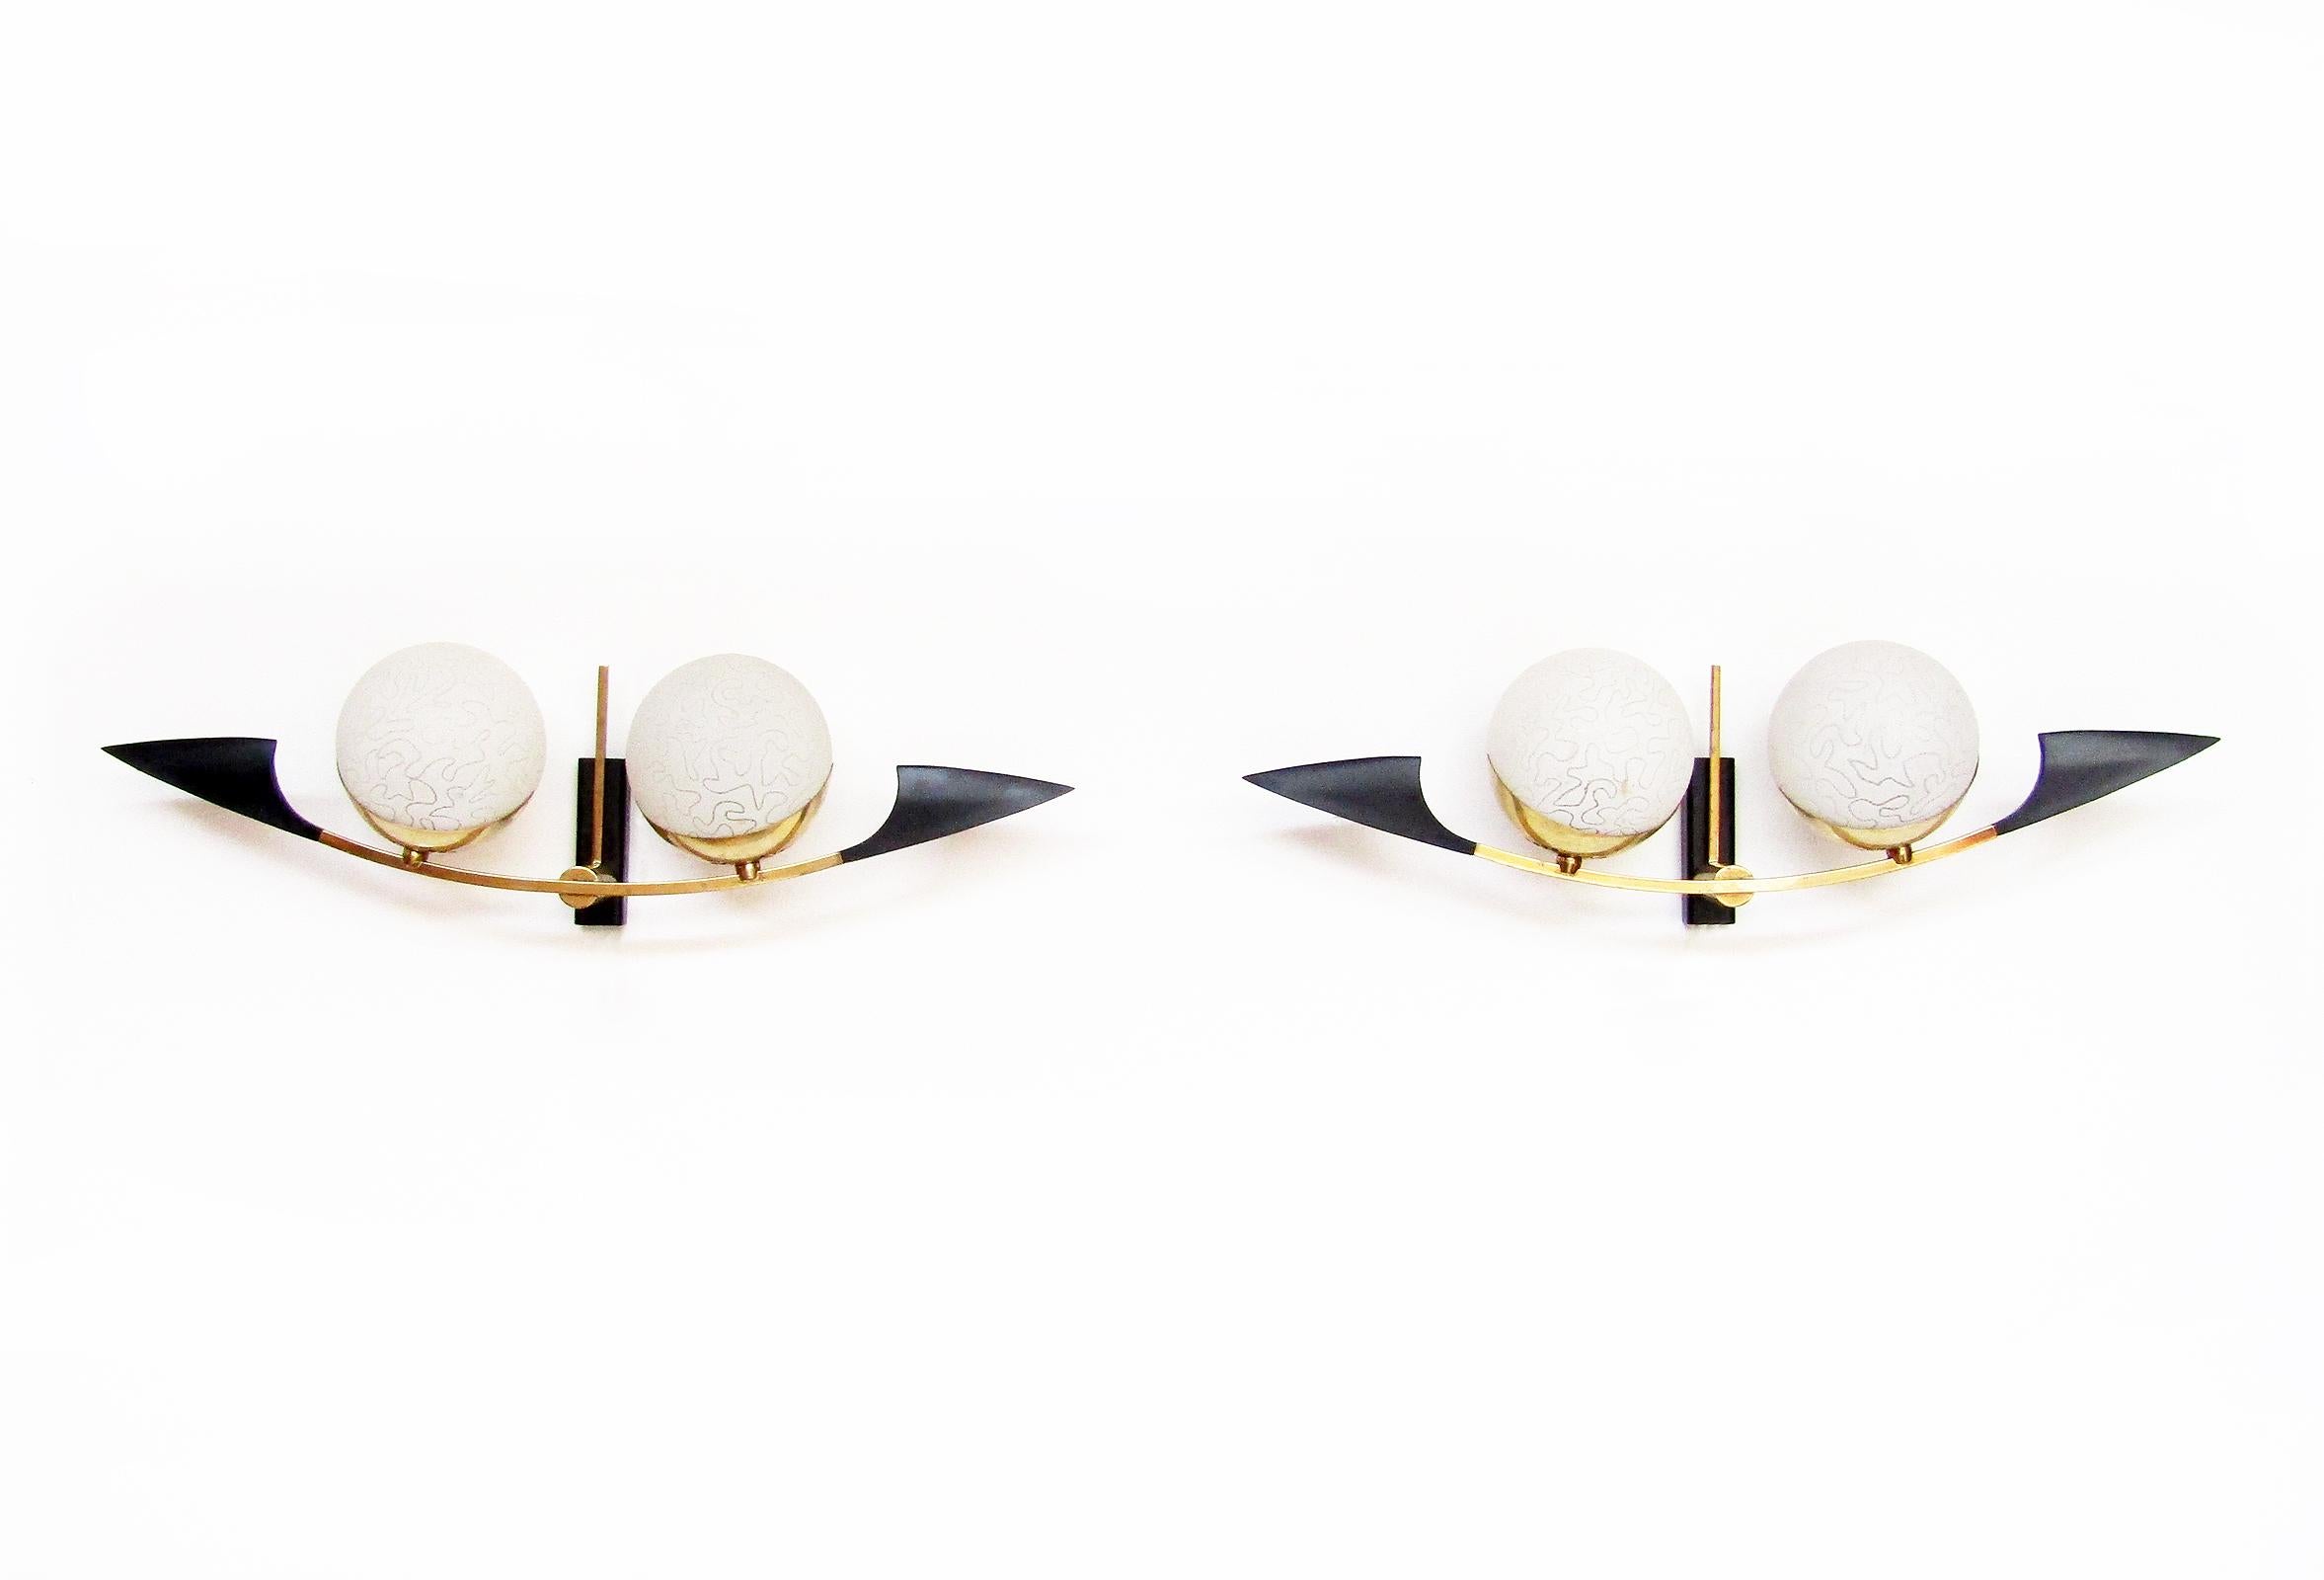 A pair of elegant globe wall sconces by French makers Maison Arlus, circa 1960.

The original globe shades are made from opaque matt glass with organic etched design. They are held on stylized brass arms with brass holders. They are 58cm in